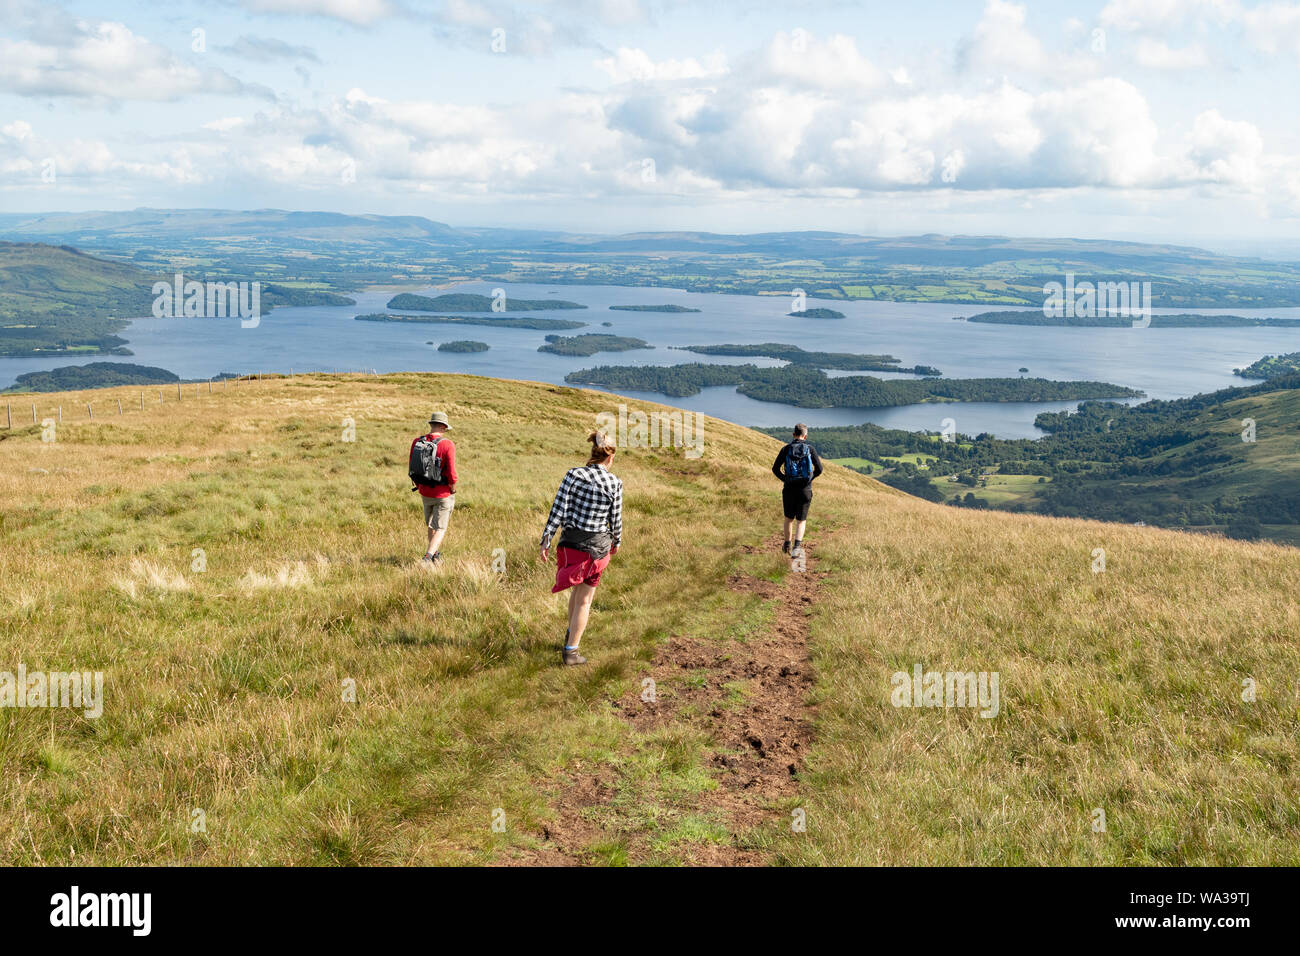 walkers decending Beinn Dubh, the highest point of the Glen Striddle hills near the village of Luss,  with views over Loch Lomond, Scotland, UK Stock Photo